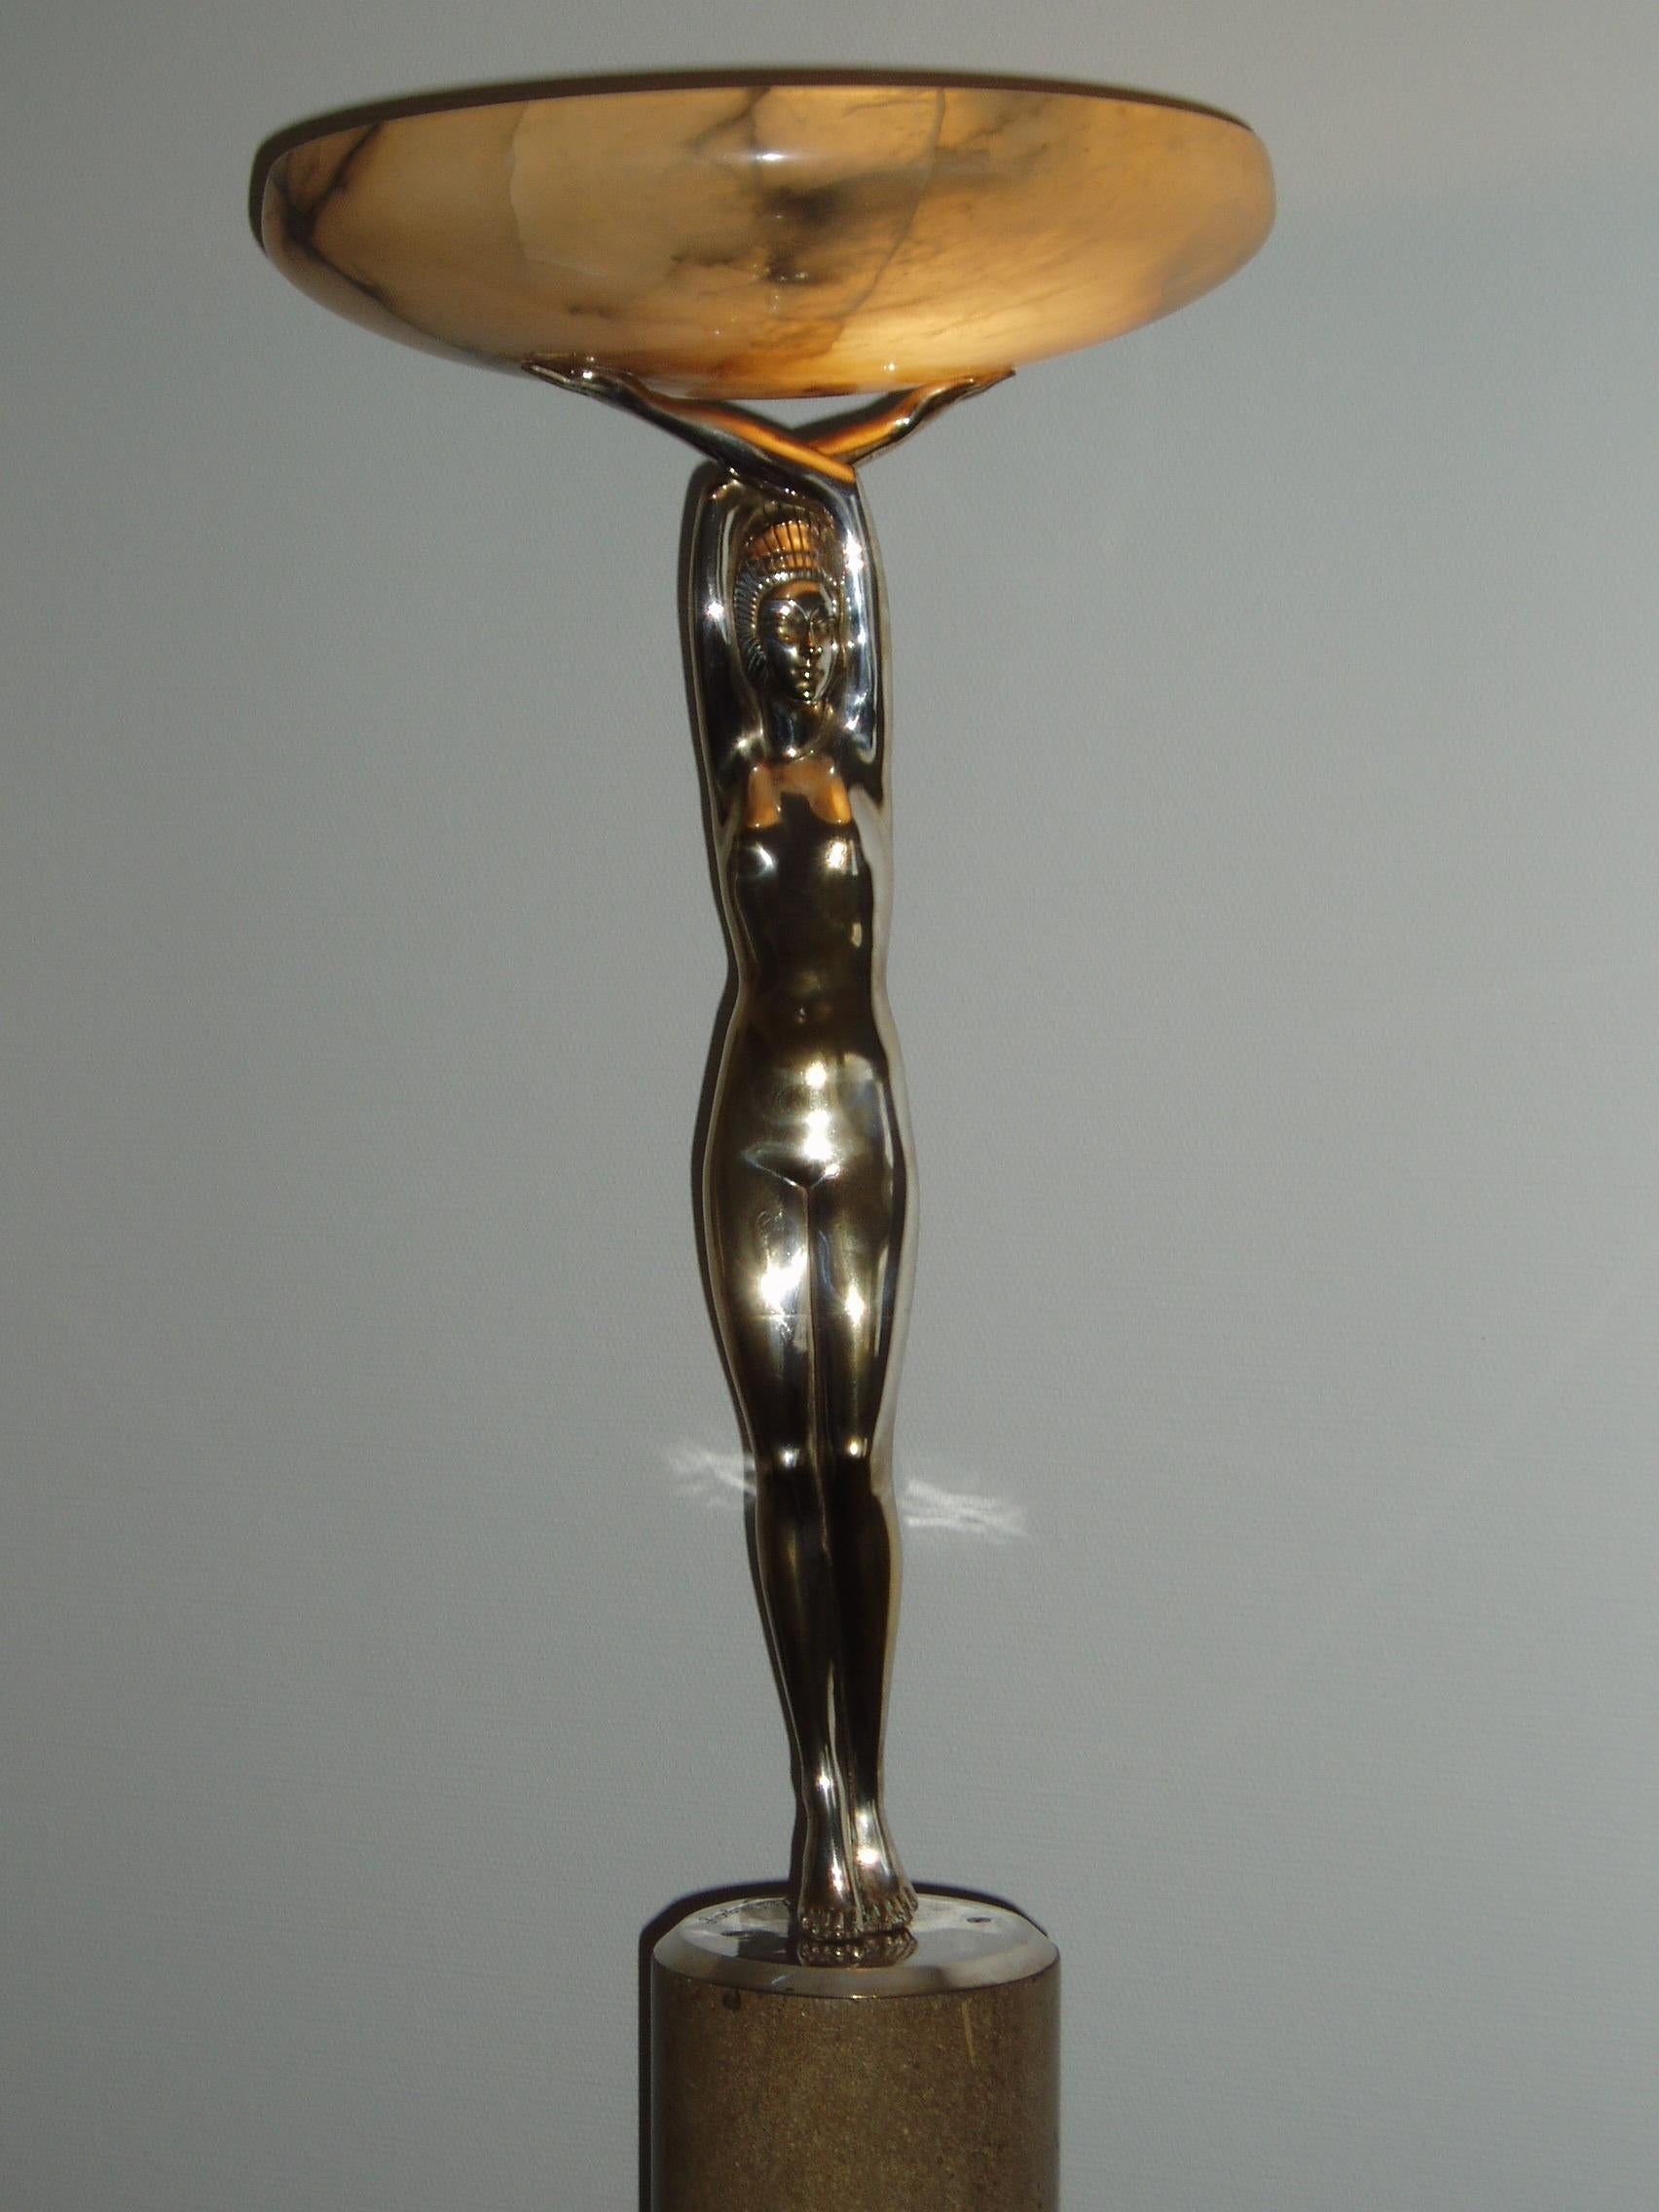 Bronze French Art Déco Sculpture by Pierre le Faguays on high Stone Base. Illuminated. For Sale